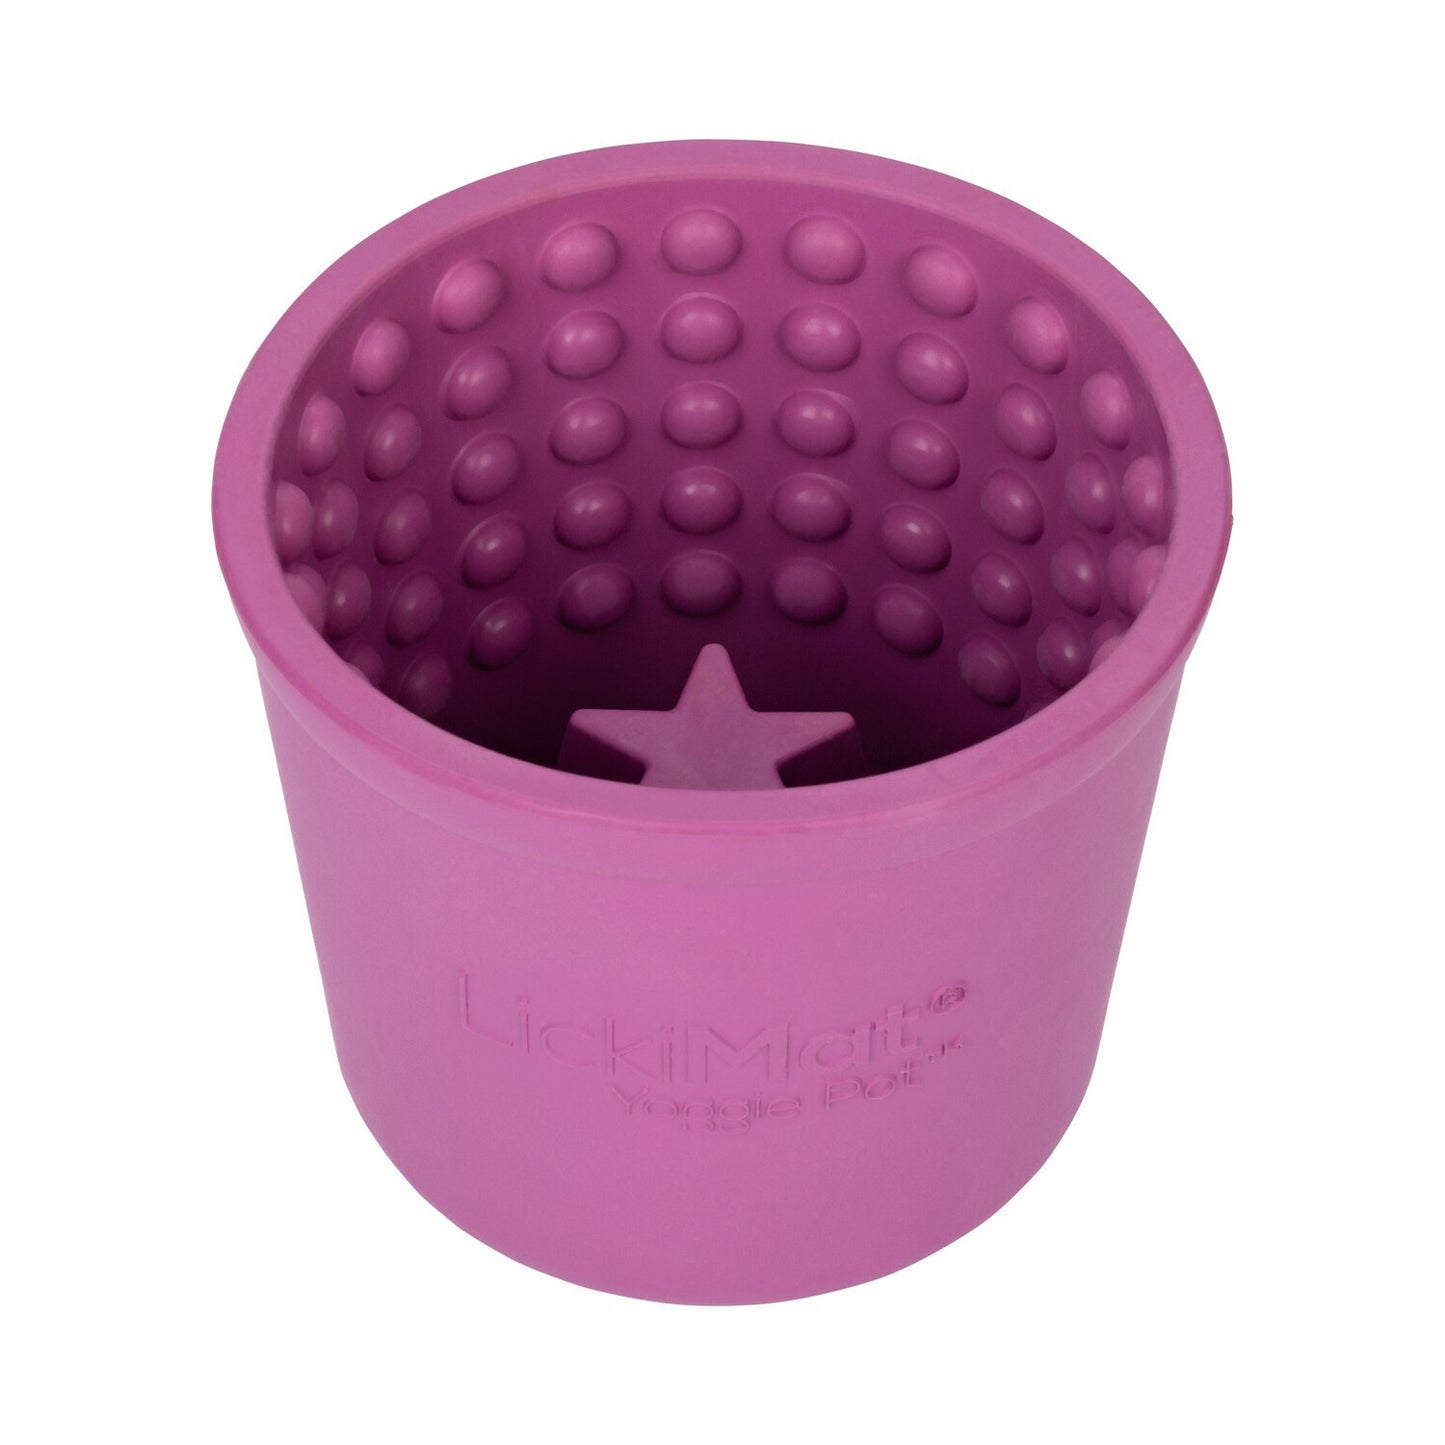 A pink Your Whole Dog LickiMat: Yoggie Pot Slow Feeder Bowl, an enrichment textured pet feeding bowl designed to slow down feeding and enhance licking stimulation for pets.